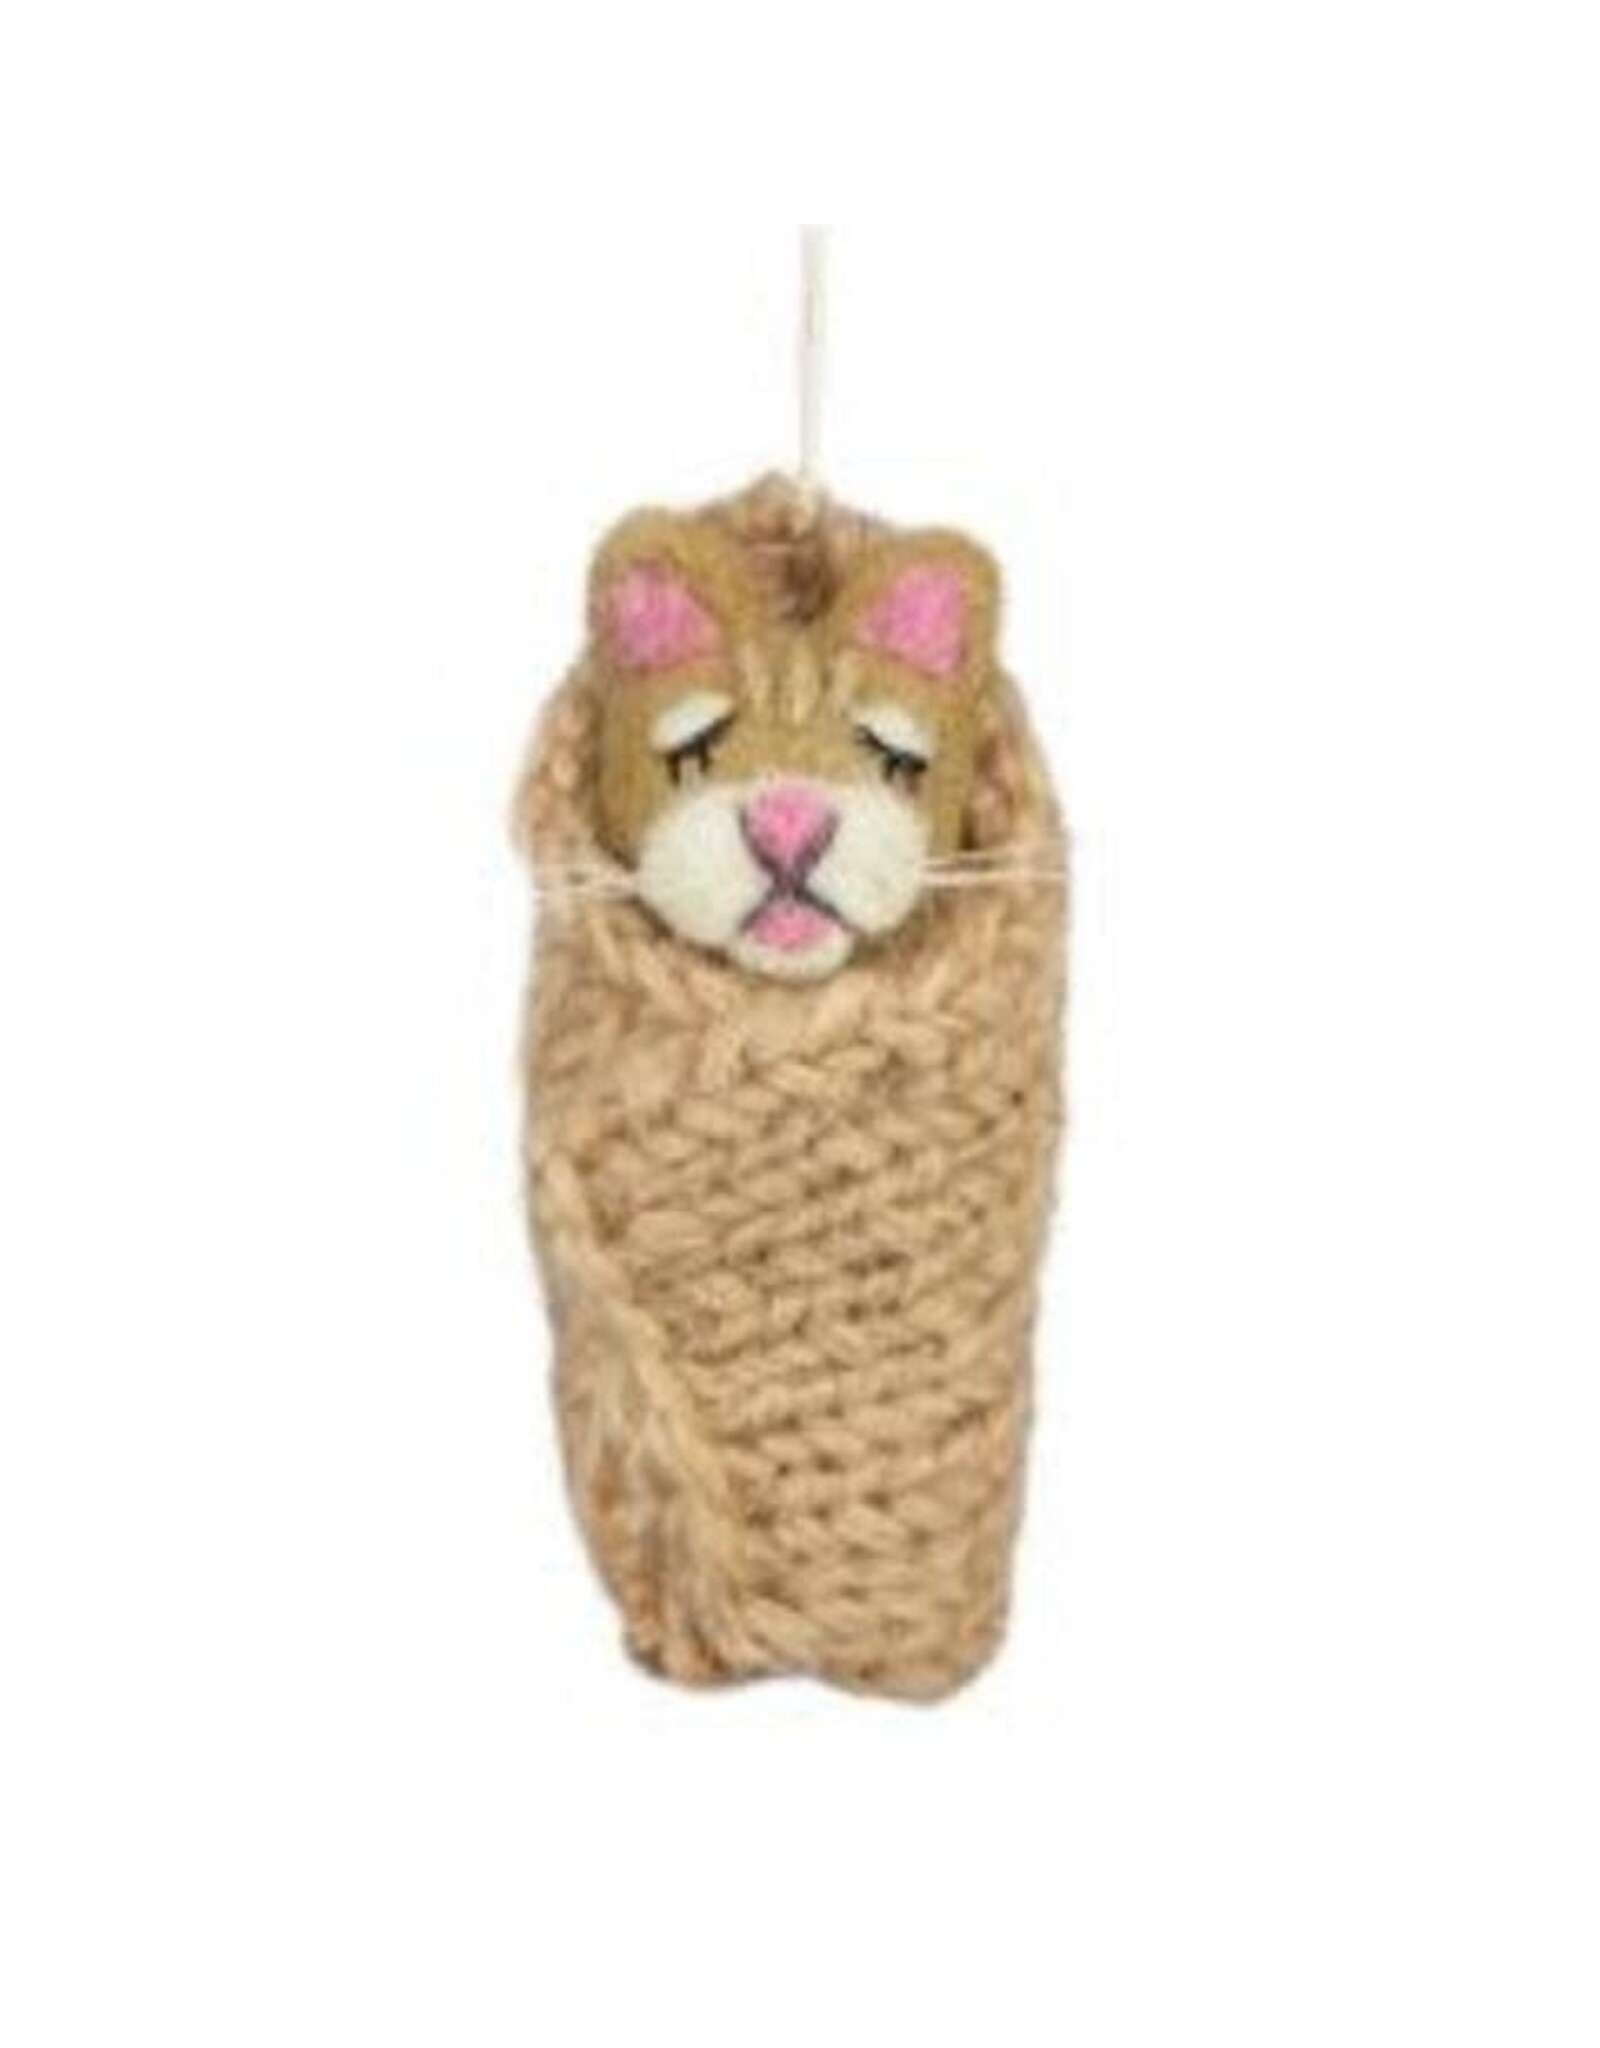 Trade roots Cozy Animal Ornament